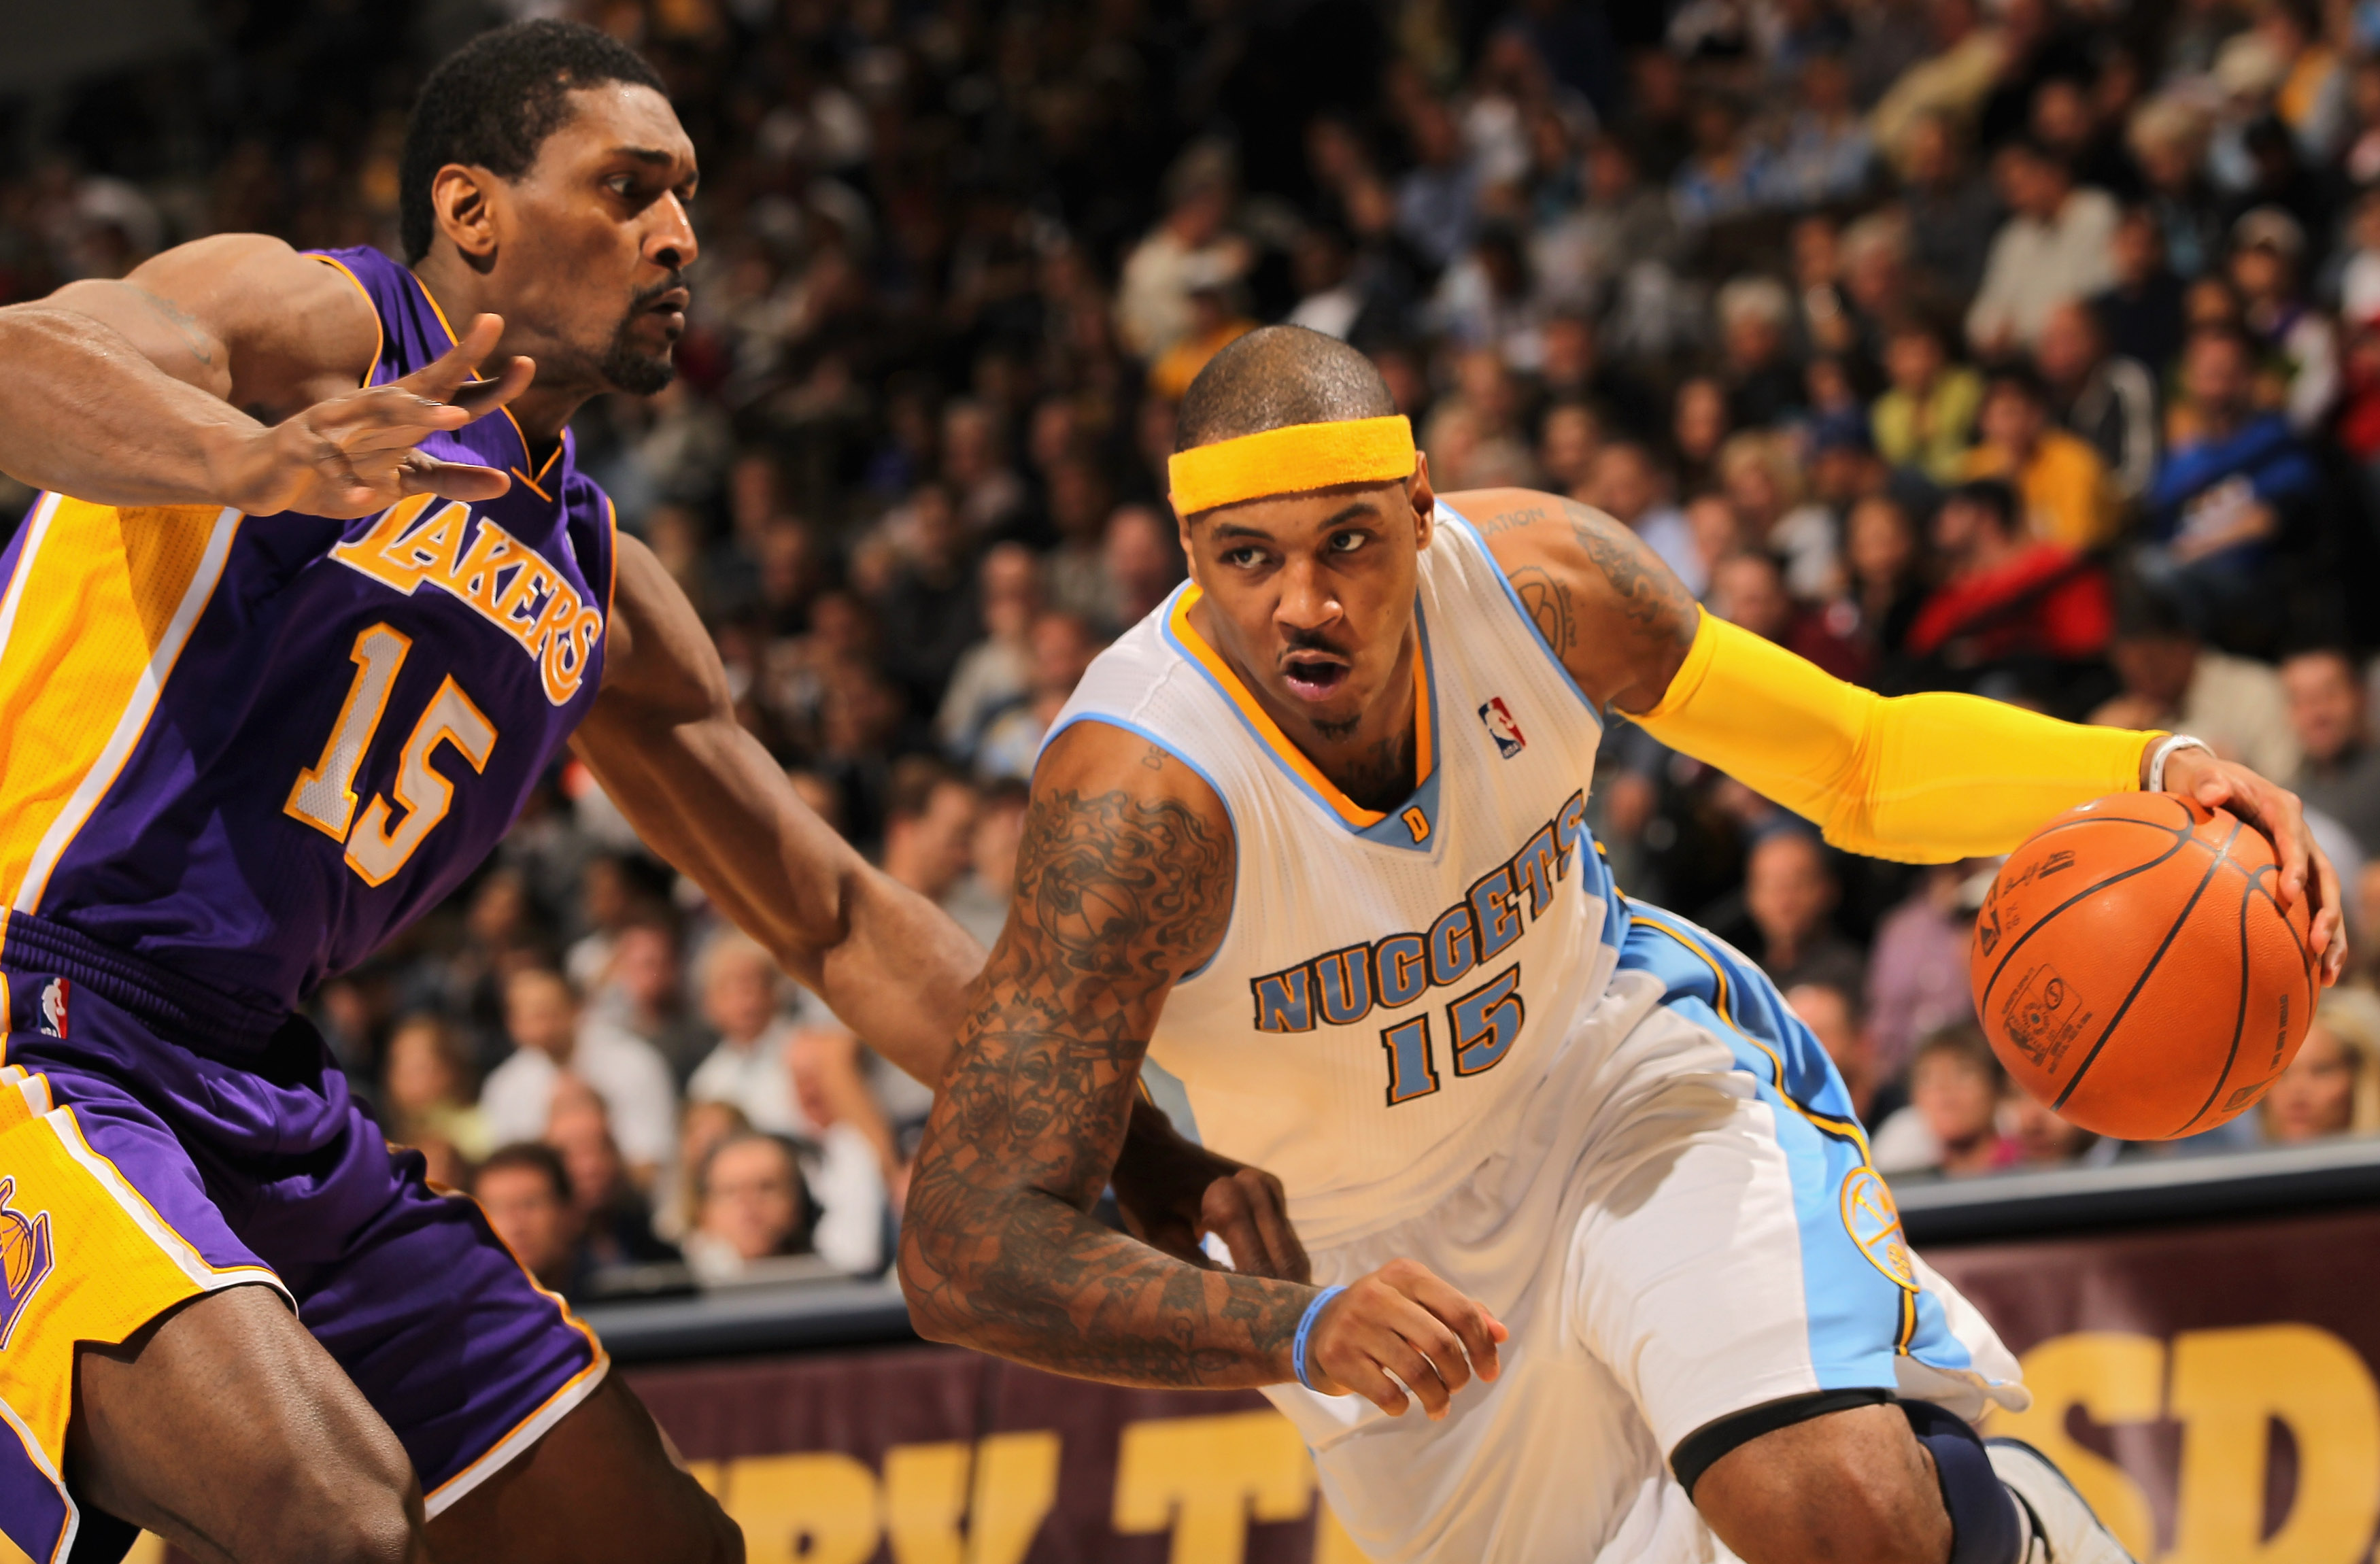 DENVER - NOVEMBER 11:  Carmelo Anthony #15 of the Denver Nuggets drives past Ron Artest #15 of the Los Angeles Lakers at Pepsi Center on November 11, 2010 in Denver, Colorado. The Nuggets defeated the Lakers 118-112.  NOTE TO USER: User expressly acknowle